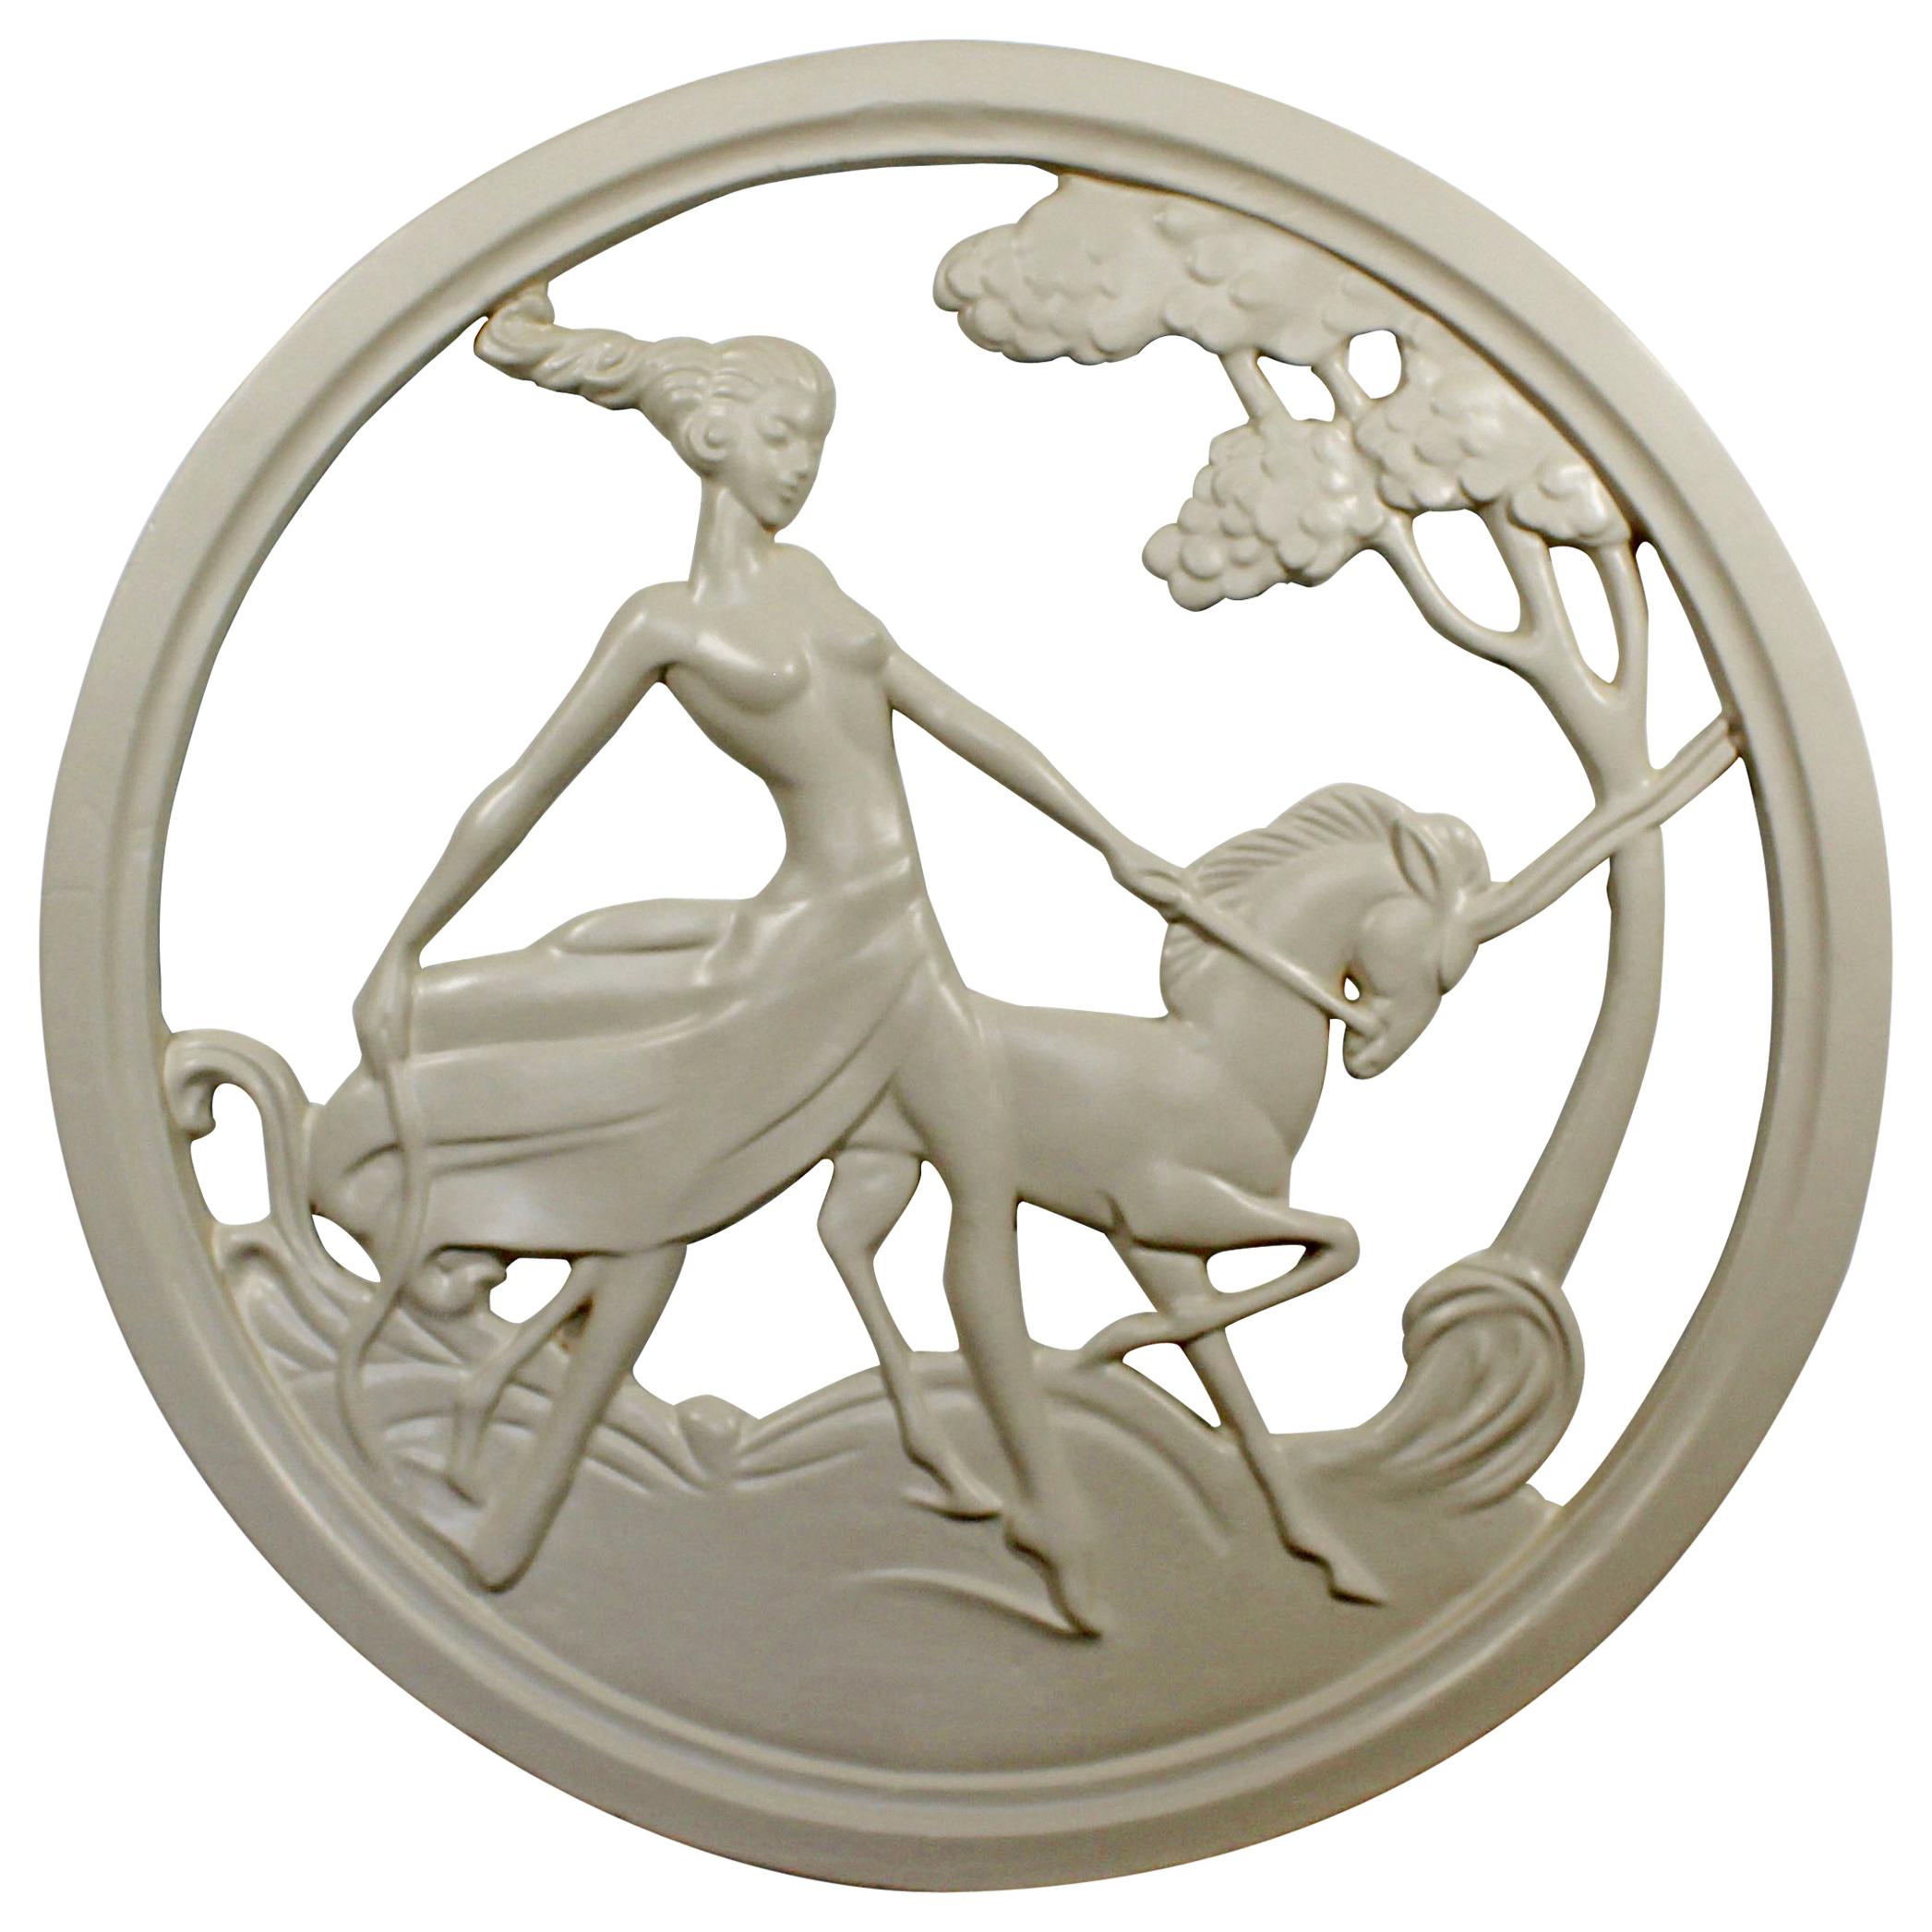 Art Deco Plaster Medallion from a New Orleans Brothel of a Female on a Unicorn